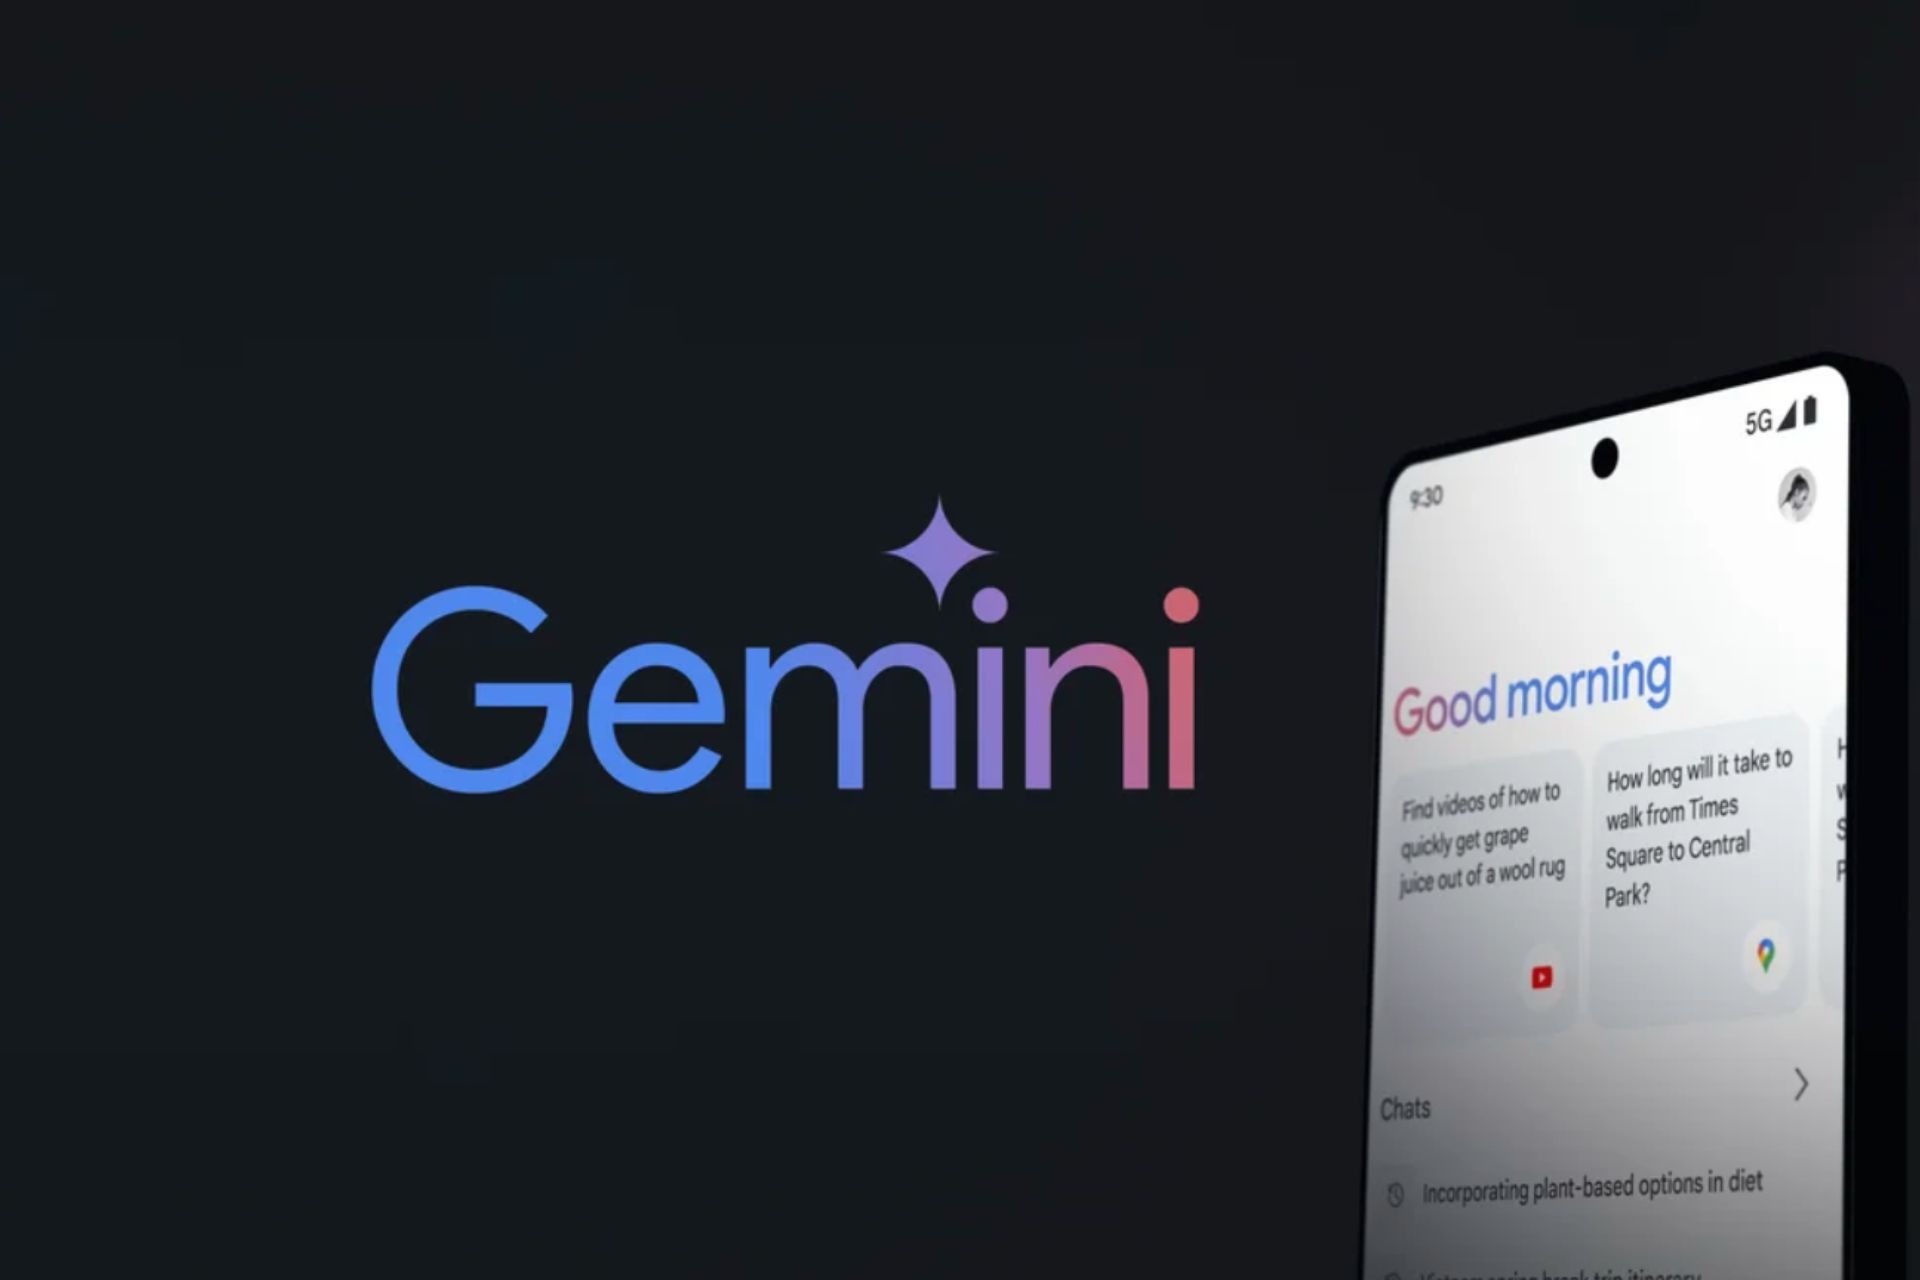 Using Gemini on a smartphone against a background with Gemini's branding 